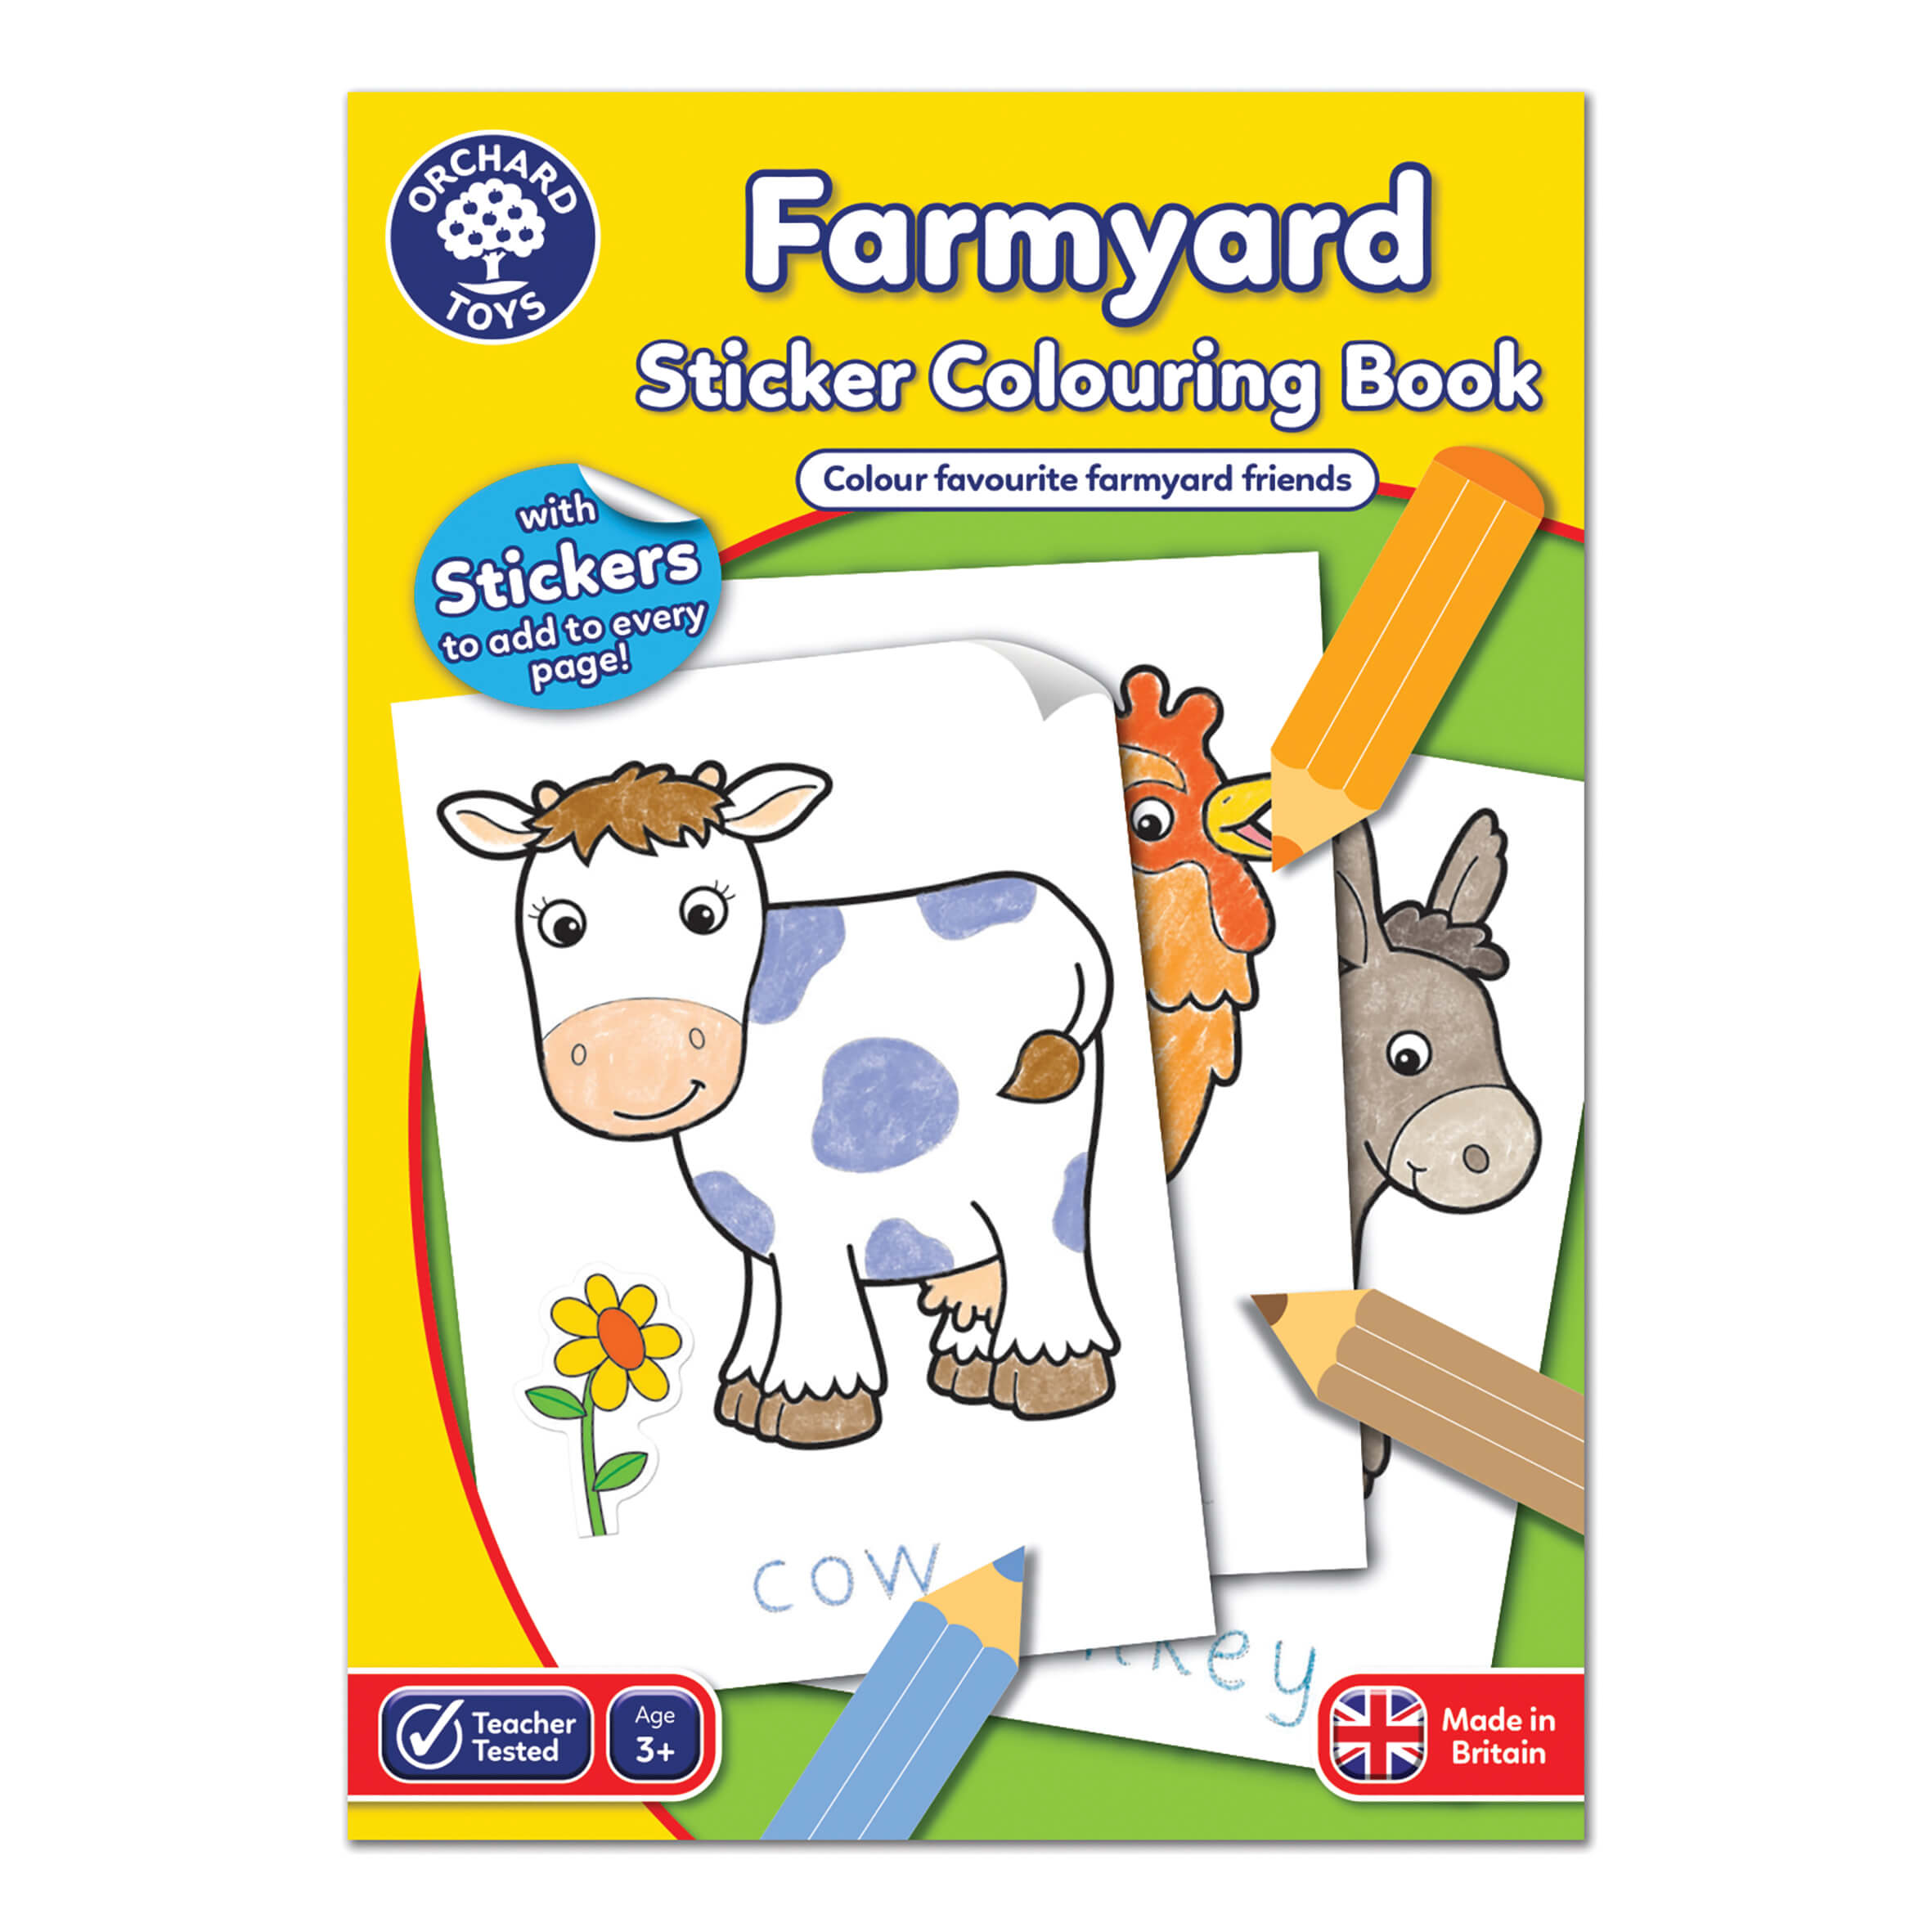 Farmyard coloring book - orchard toys - product view